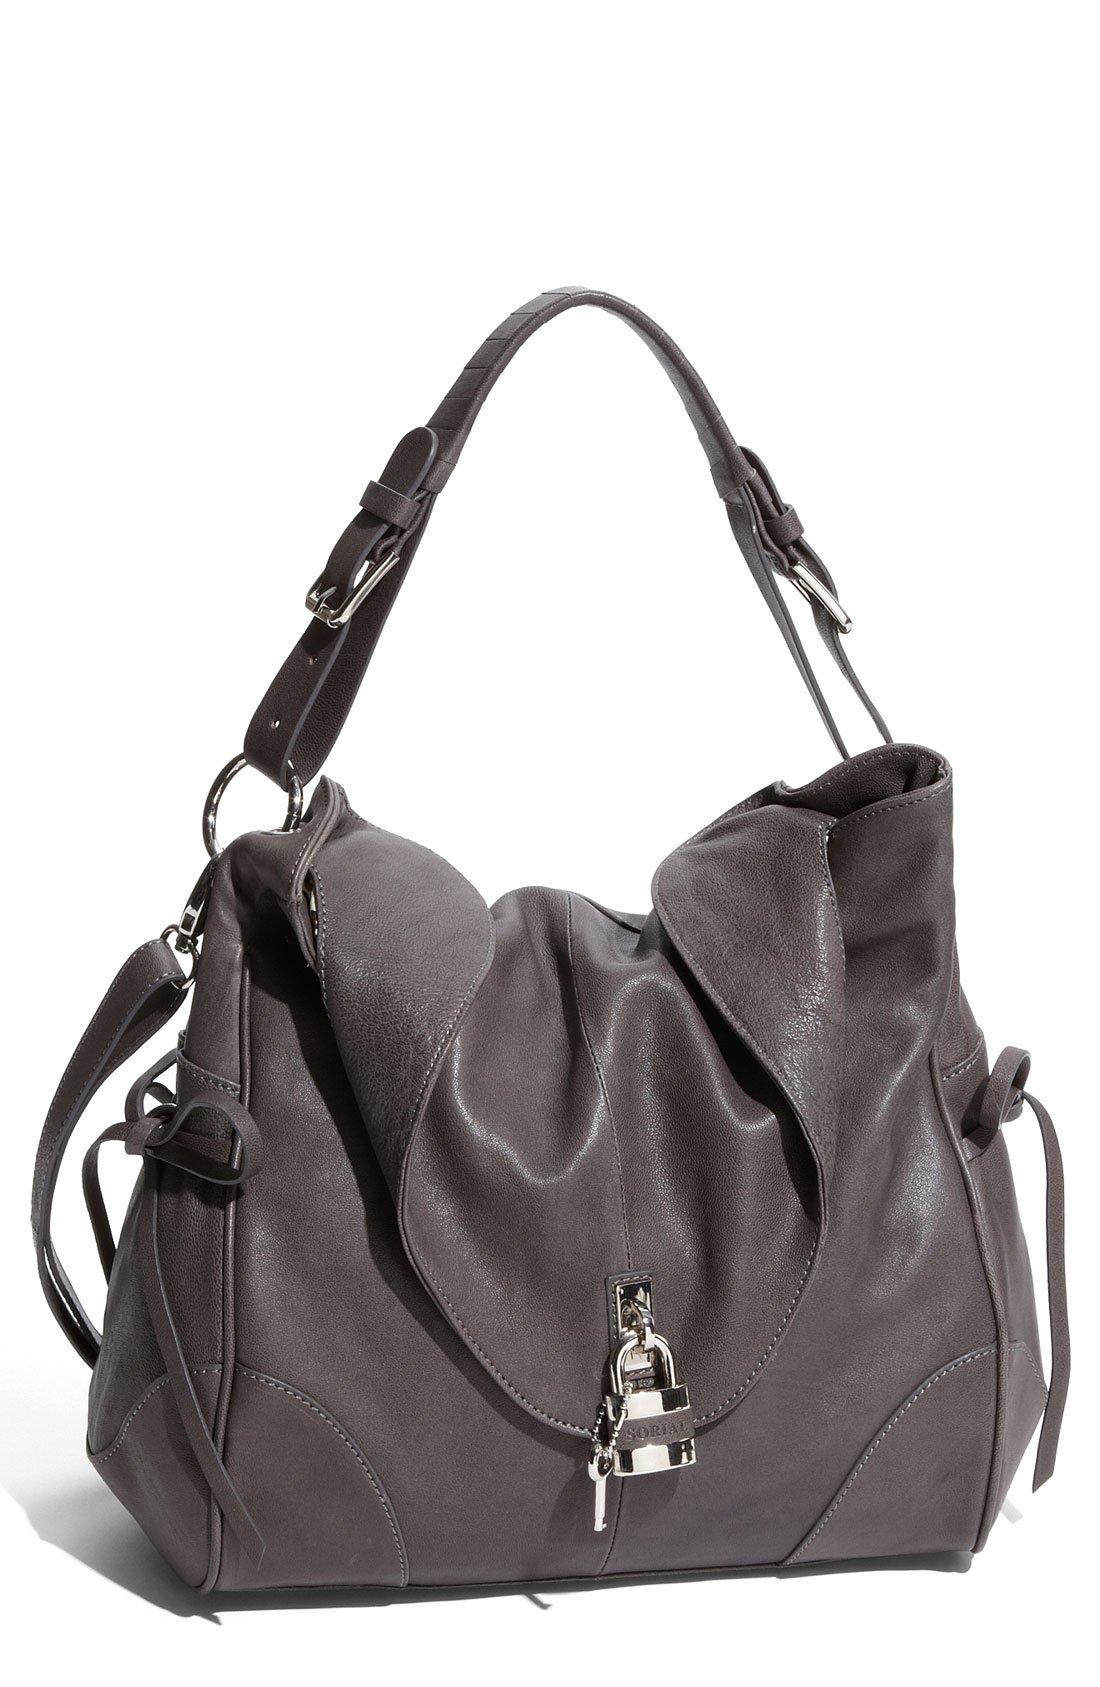 Sorial Fortune Cookie Ruffle Flap Hobo in Gray (grey) | Lyst